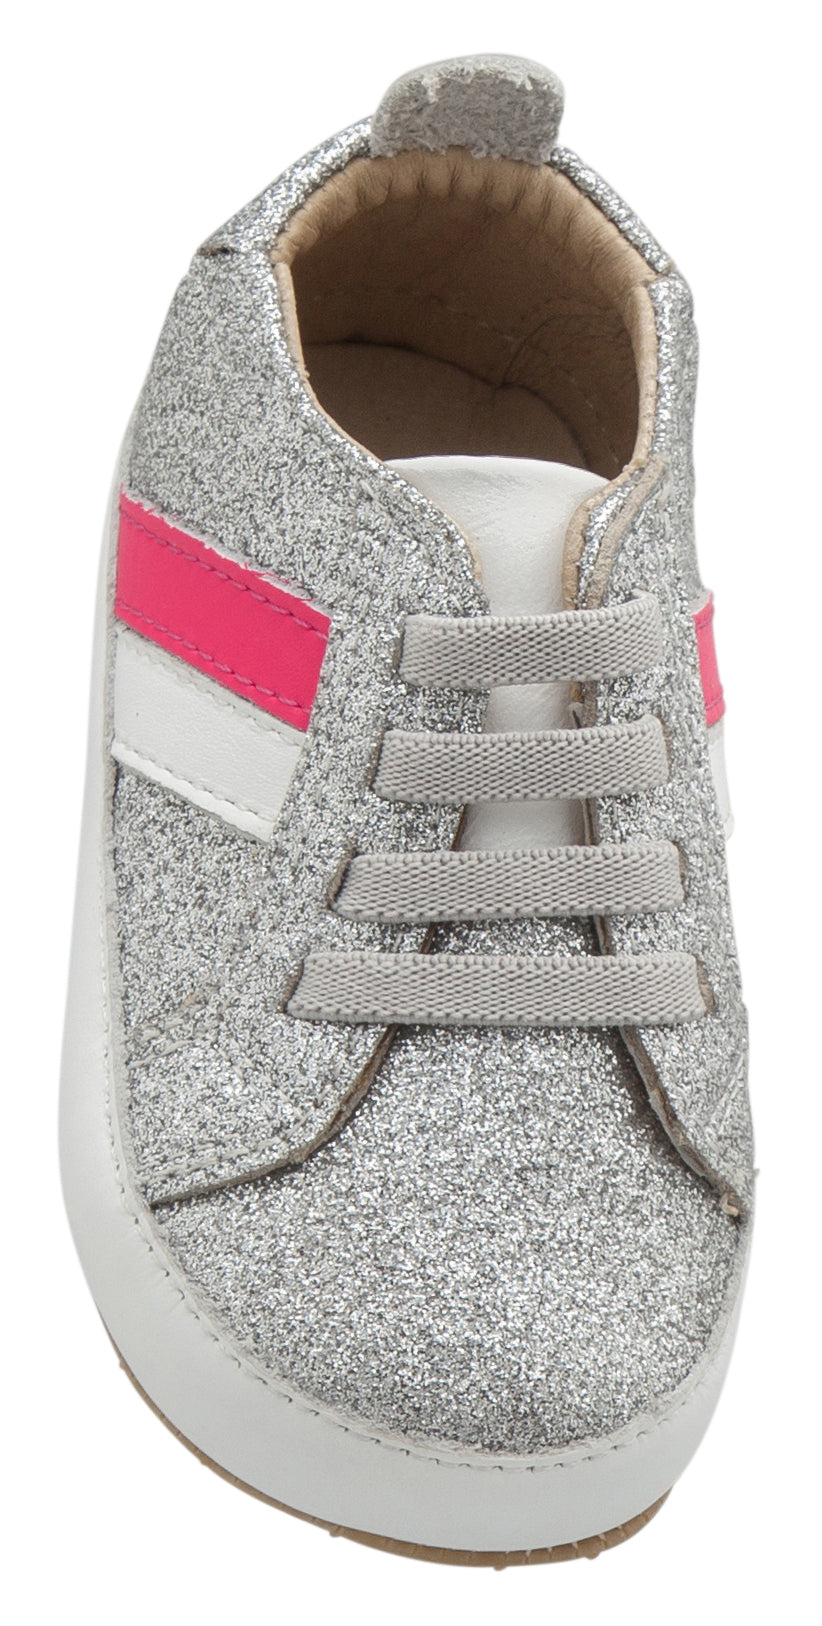 Old Soles Girl's 0028R Iggy Shoe, Glam Argent/Snow/Neon Pink